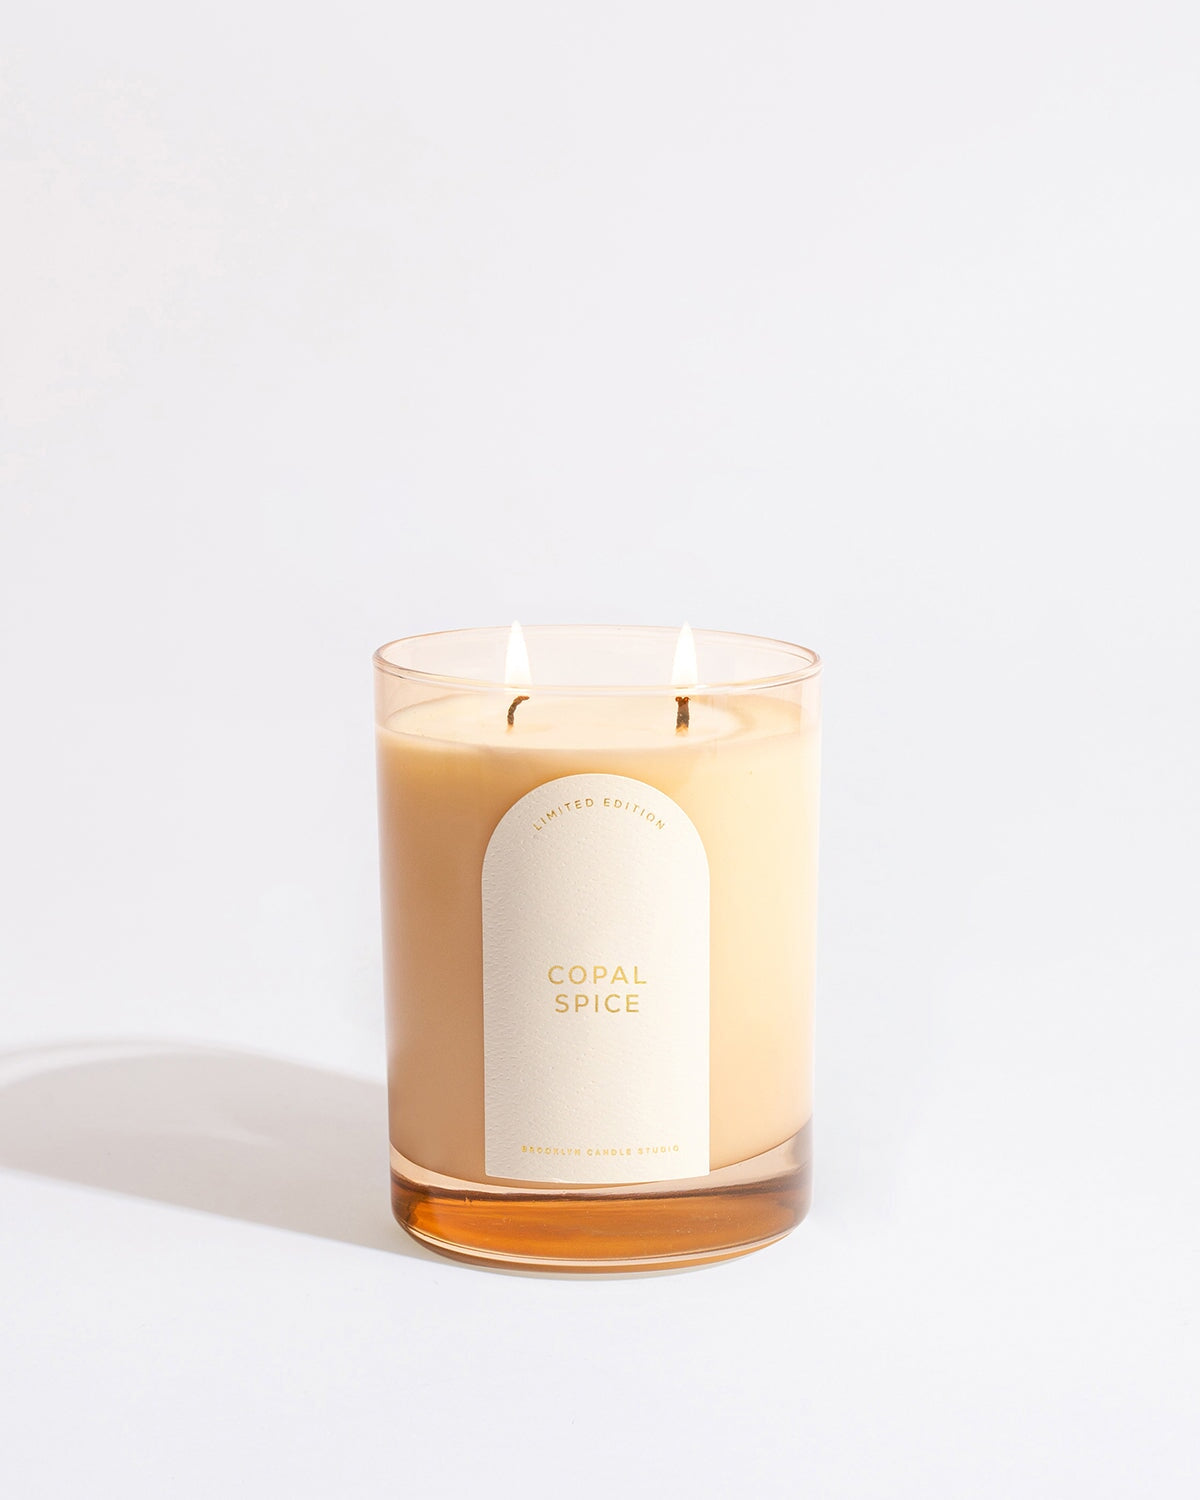 Limited Edition Copal Spice Candle – Brooklyn Candle Studio